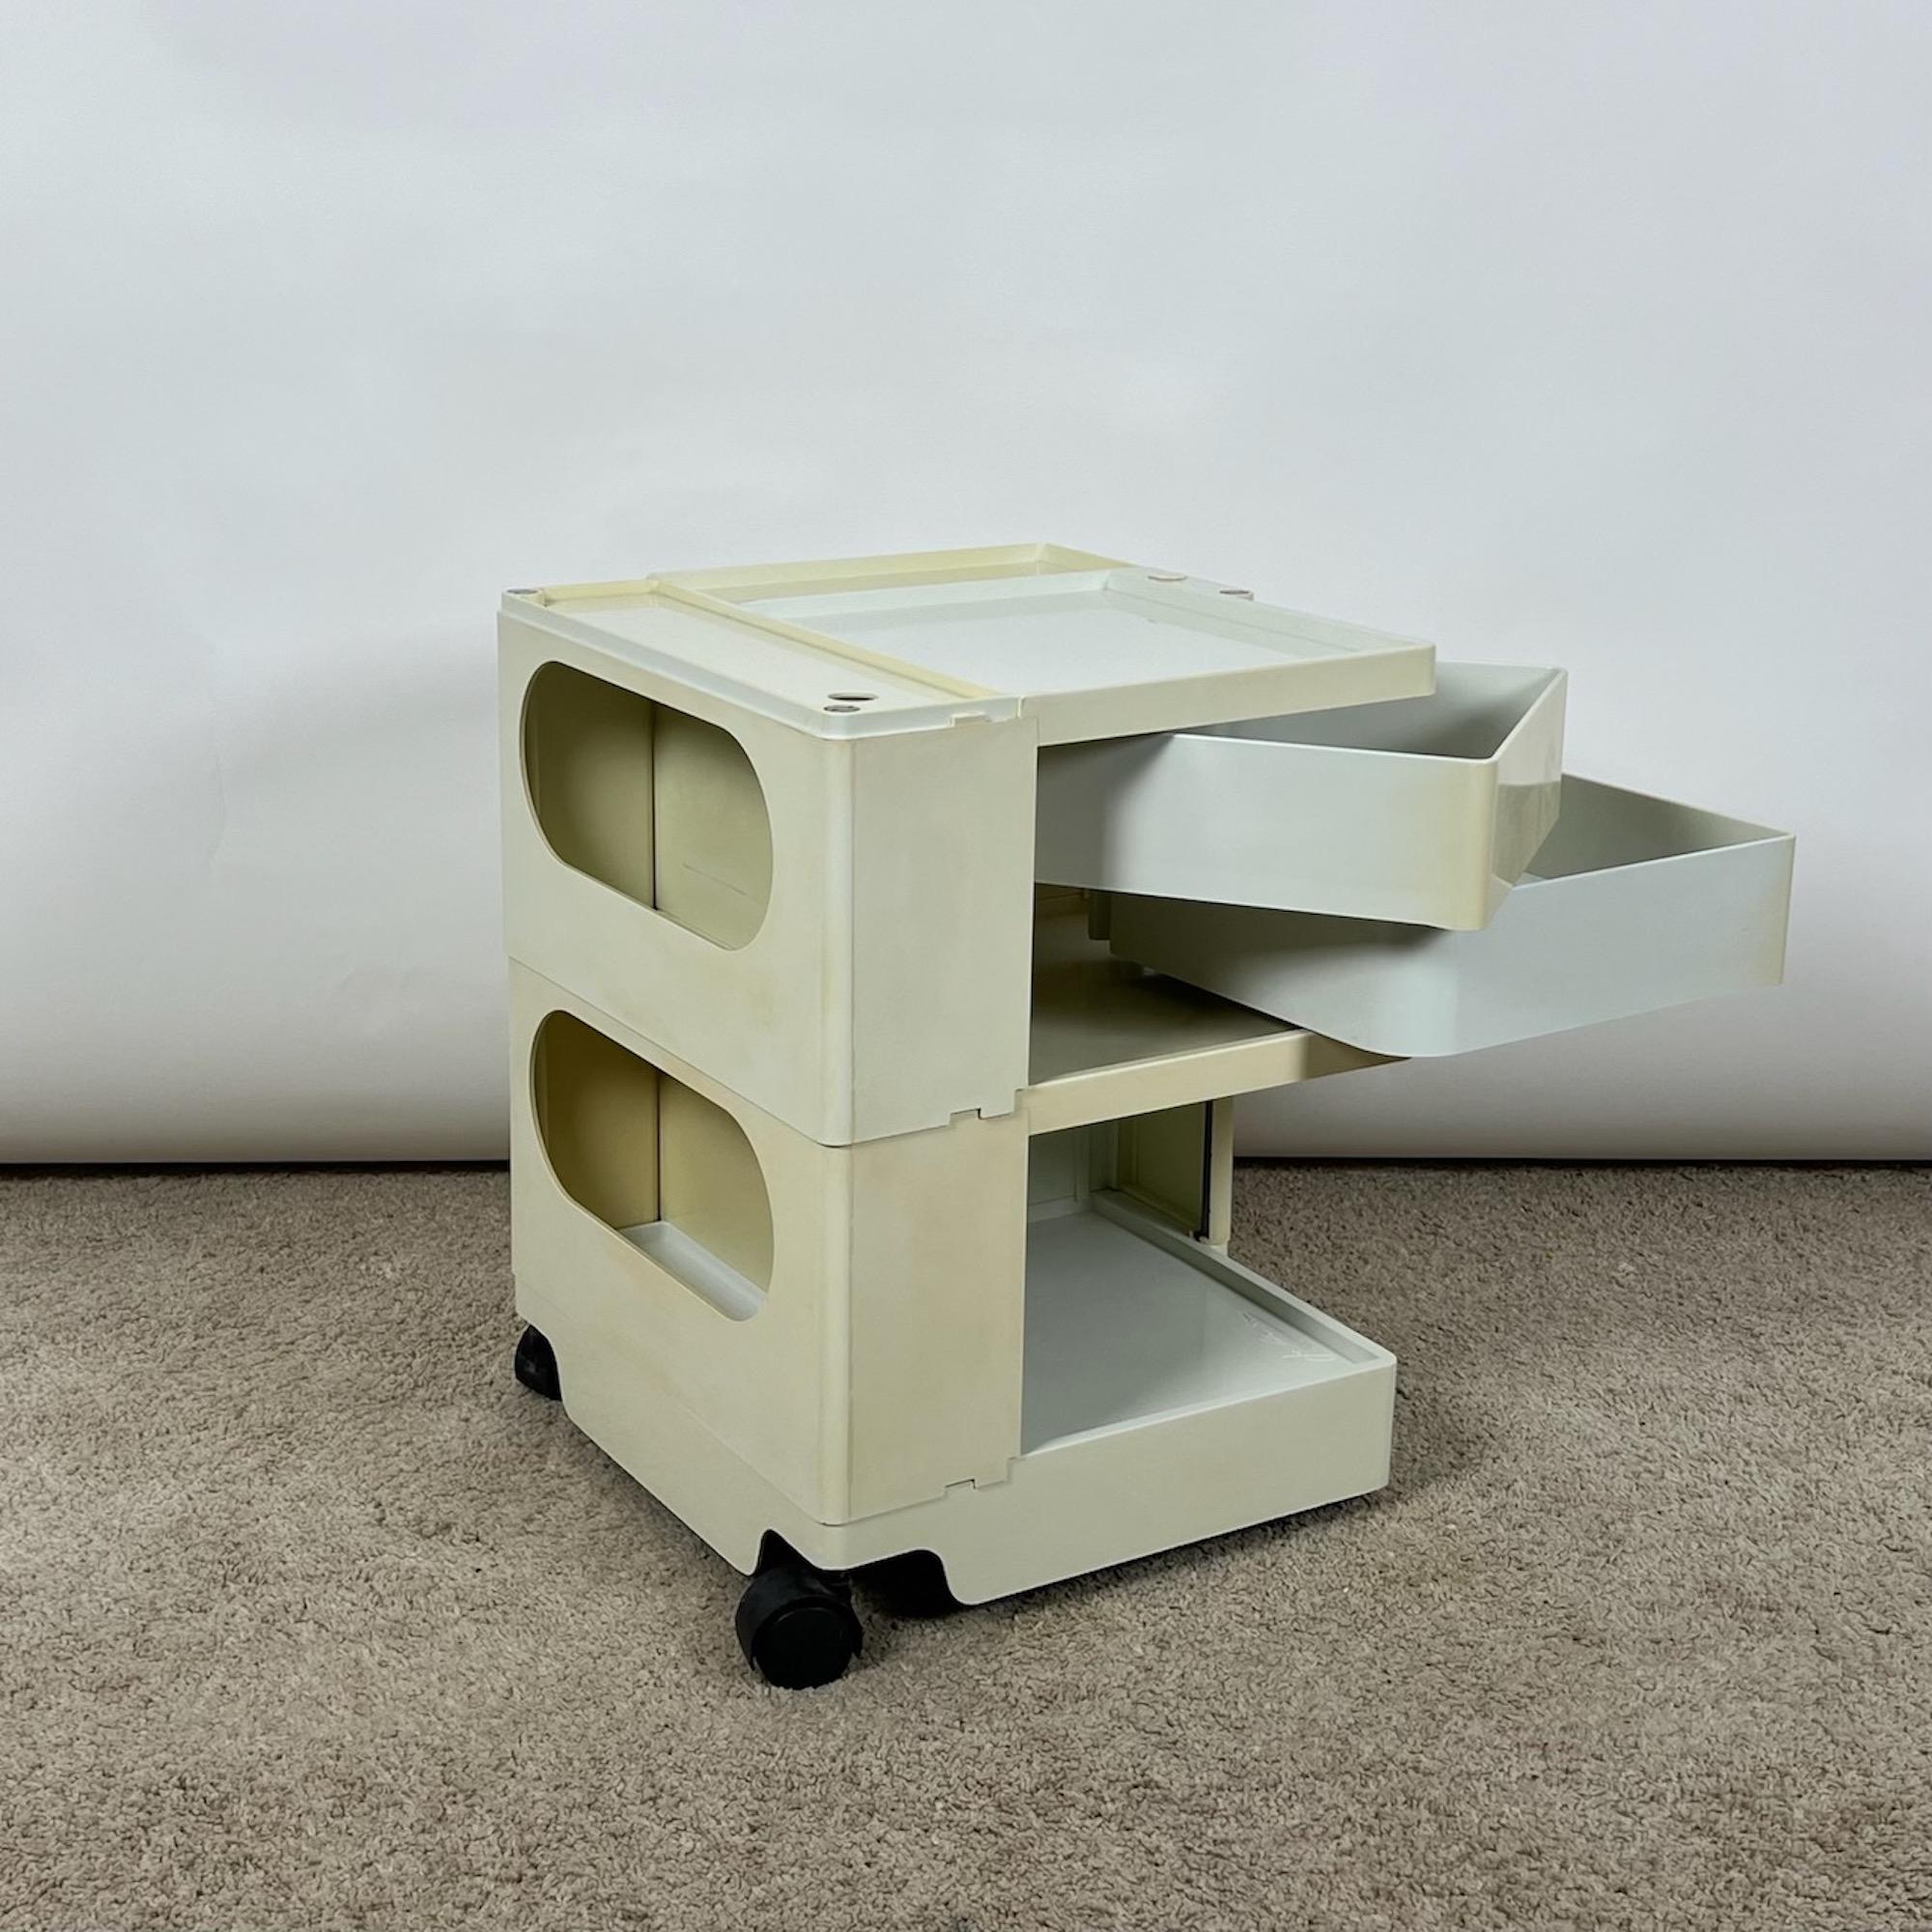 tep into the world of timeless design with the legendary Boby Trolley, a masterpiece crafted by the visionary Joe Colombo and produced by Bieffeplast in the 1970s. This iconic storage solution is not just furniture; it's a piece of history.

A